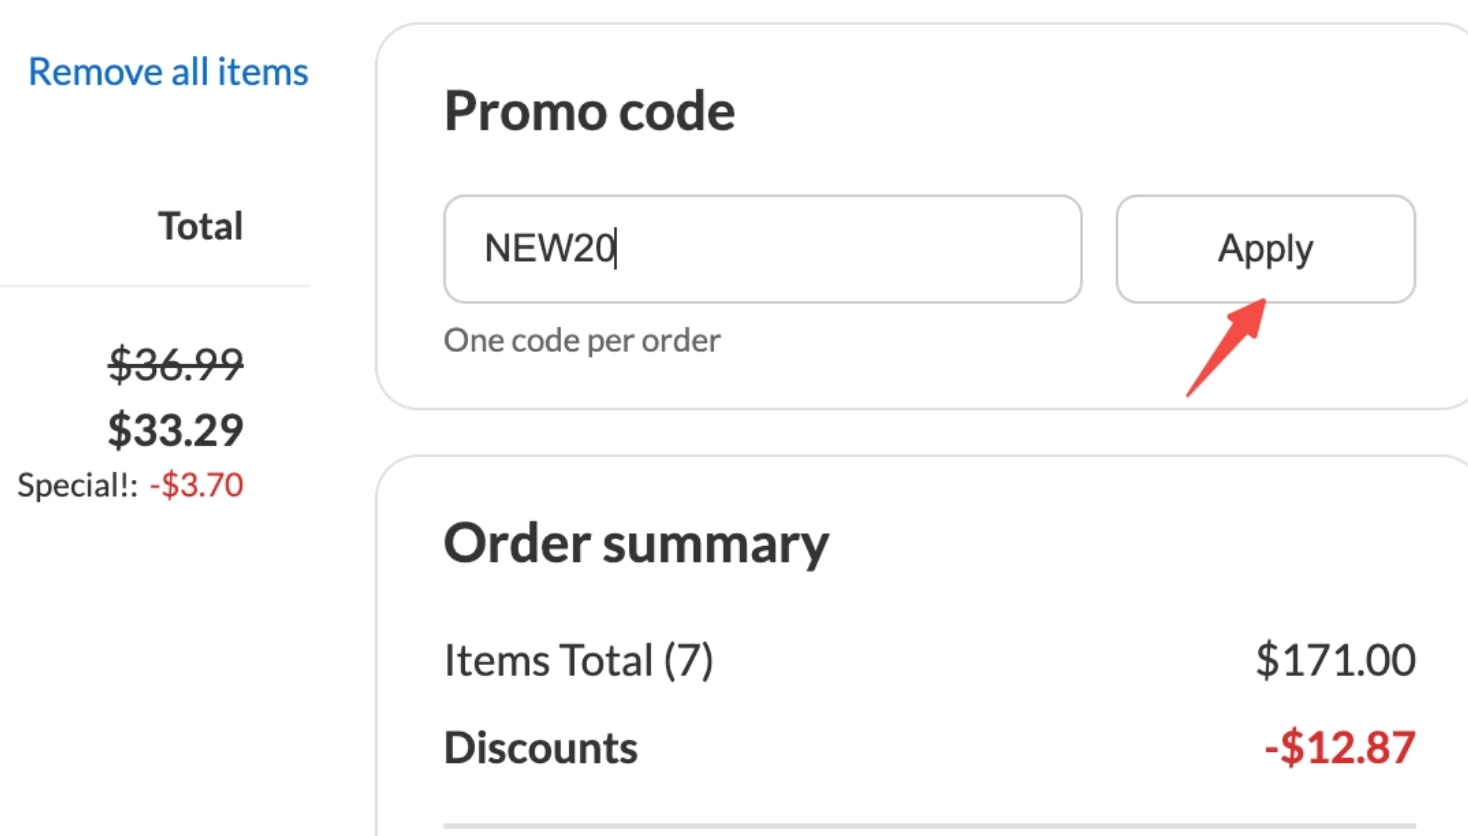 Step 3: When checking out at discountfridgefilters.com.au, paste the discount code into the specified promotional code box.